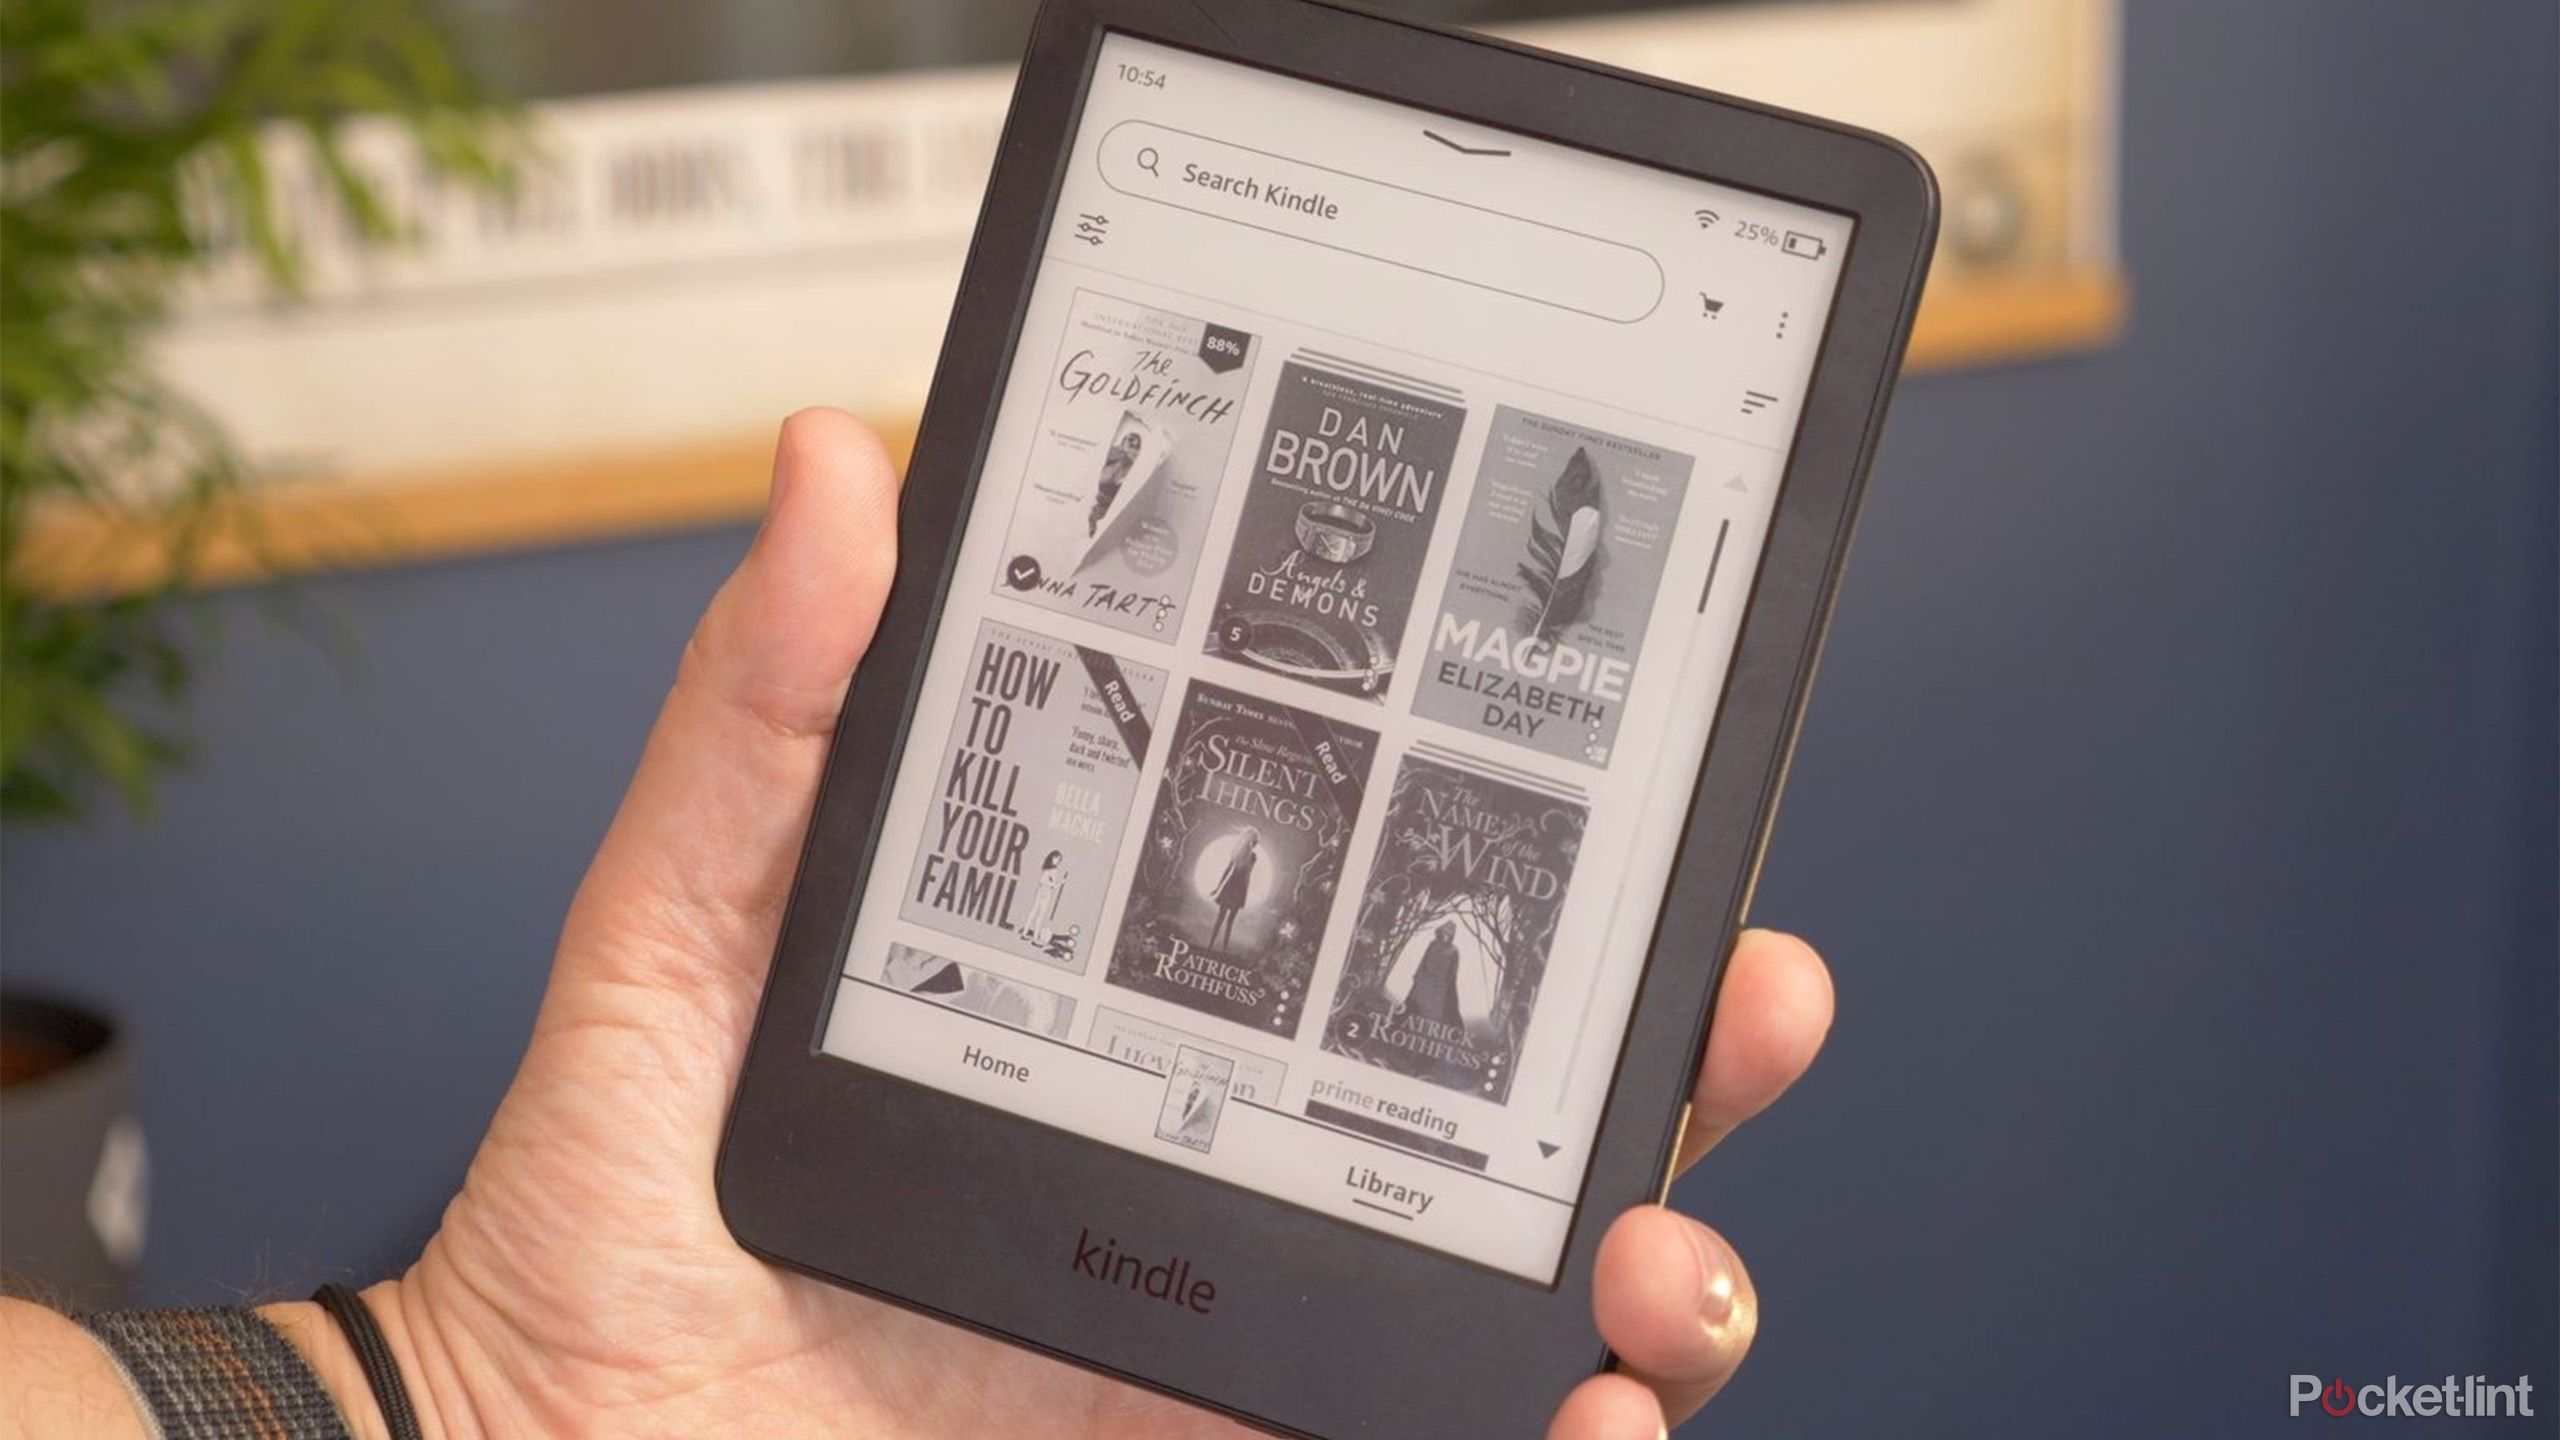 Amazon Kindle owners can’t download their e-books